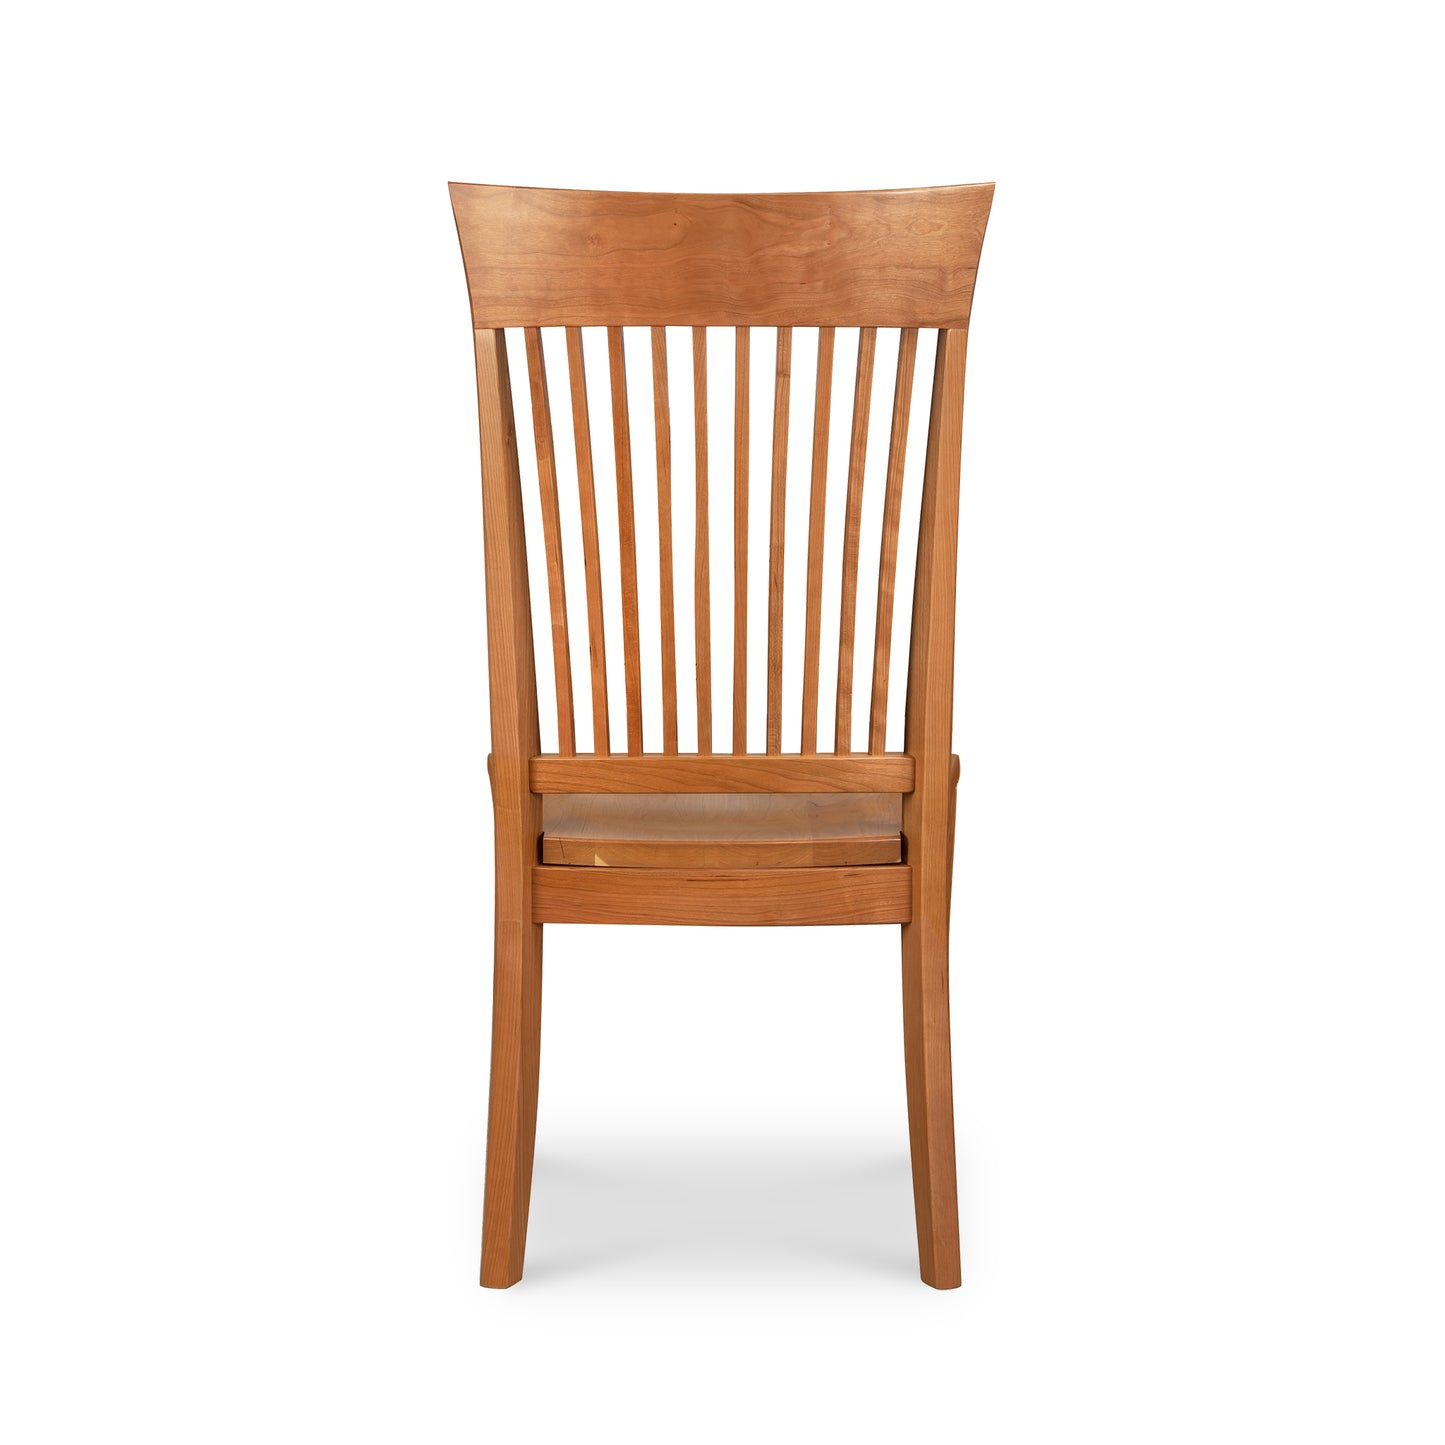 A Vermont Woods Studios Contemporary Shaker Chair with Wood Seat, featuring a high, slightly curved backrest with vertical slats and a scooped wooden seat, presented against a white background.